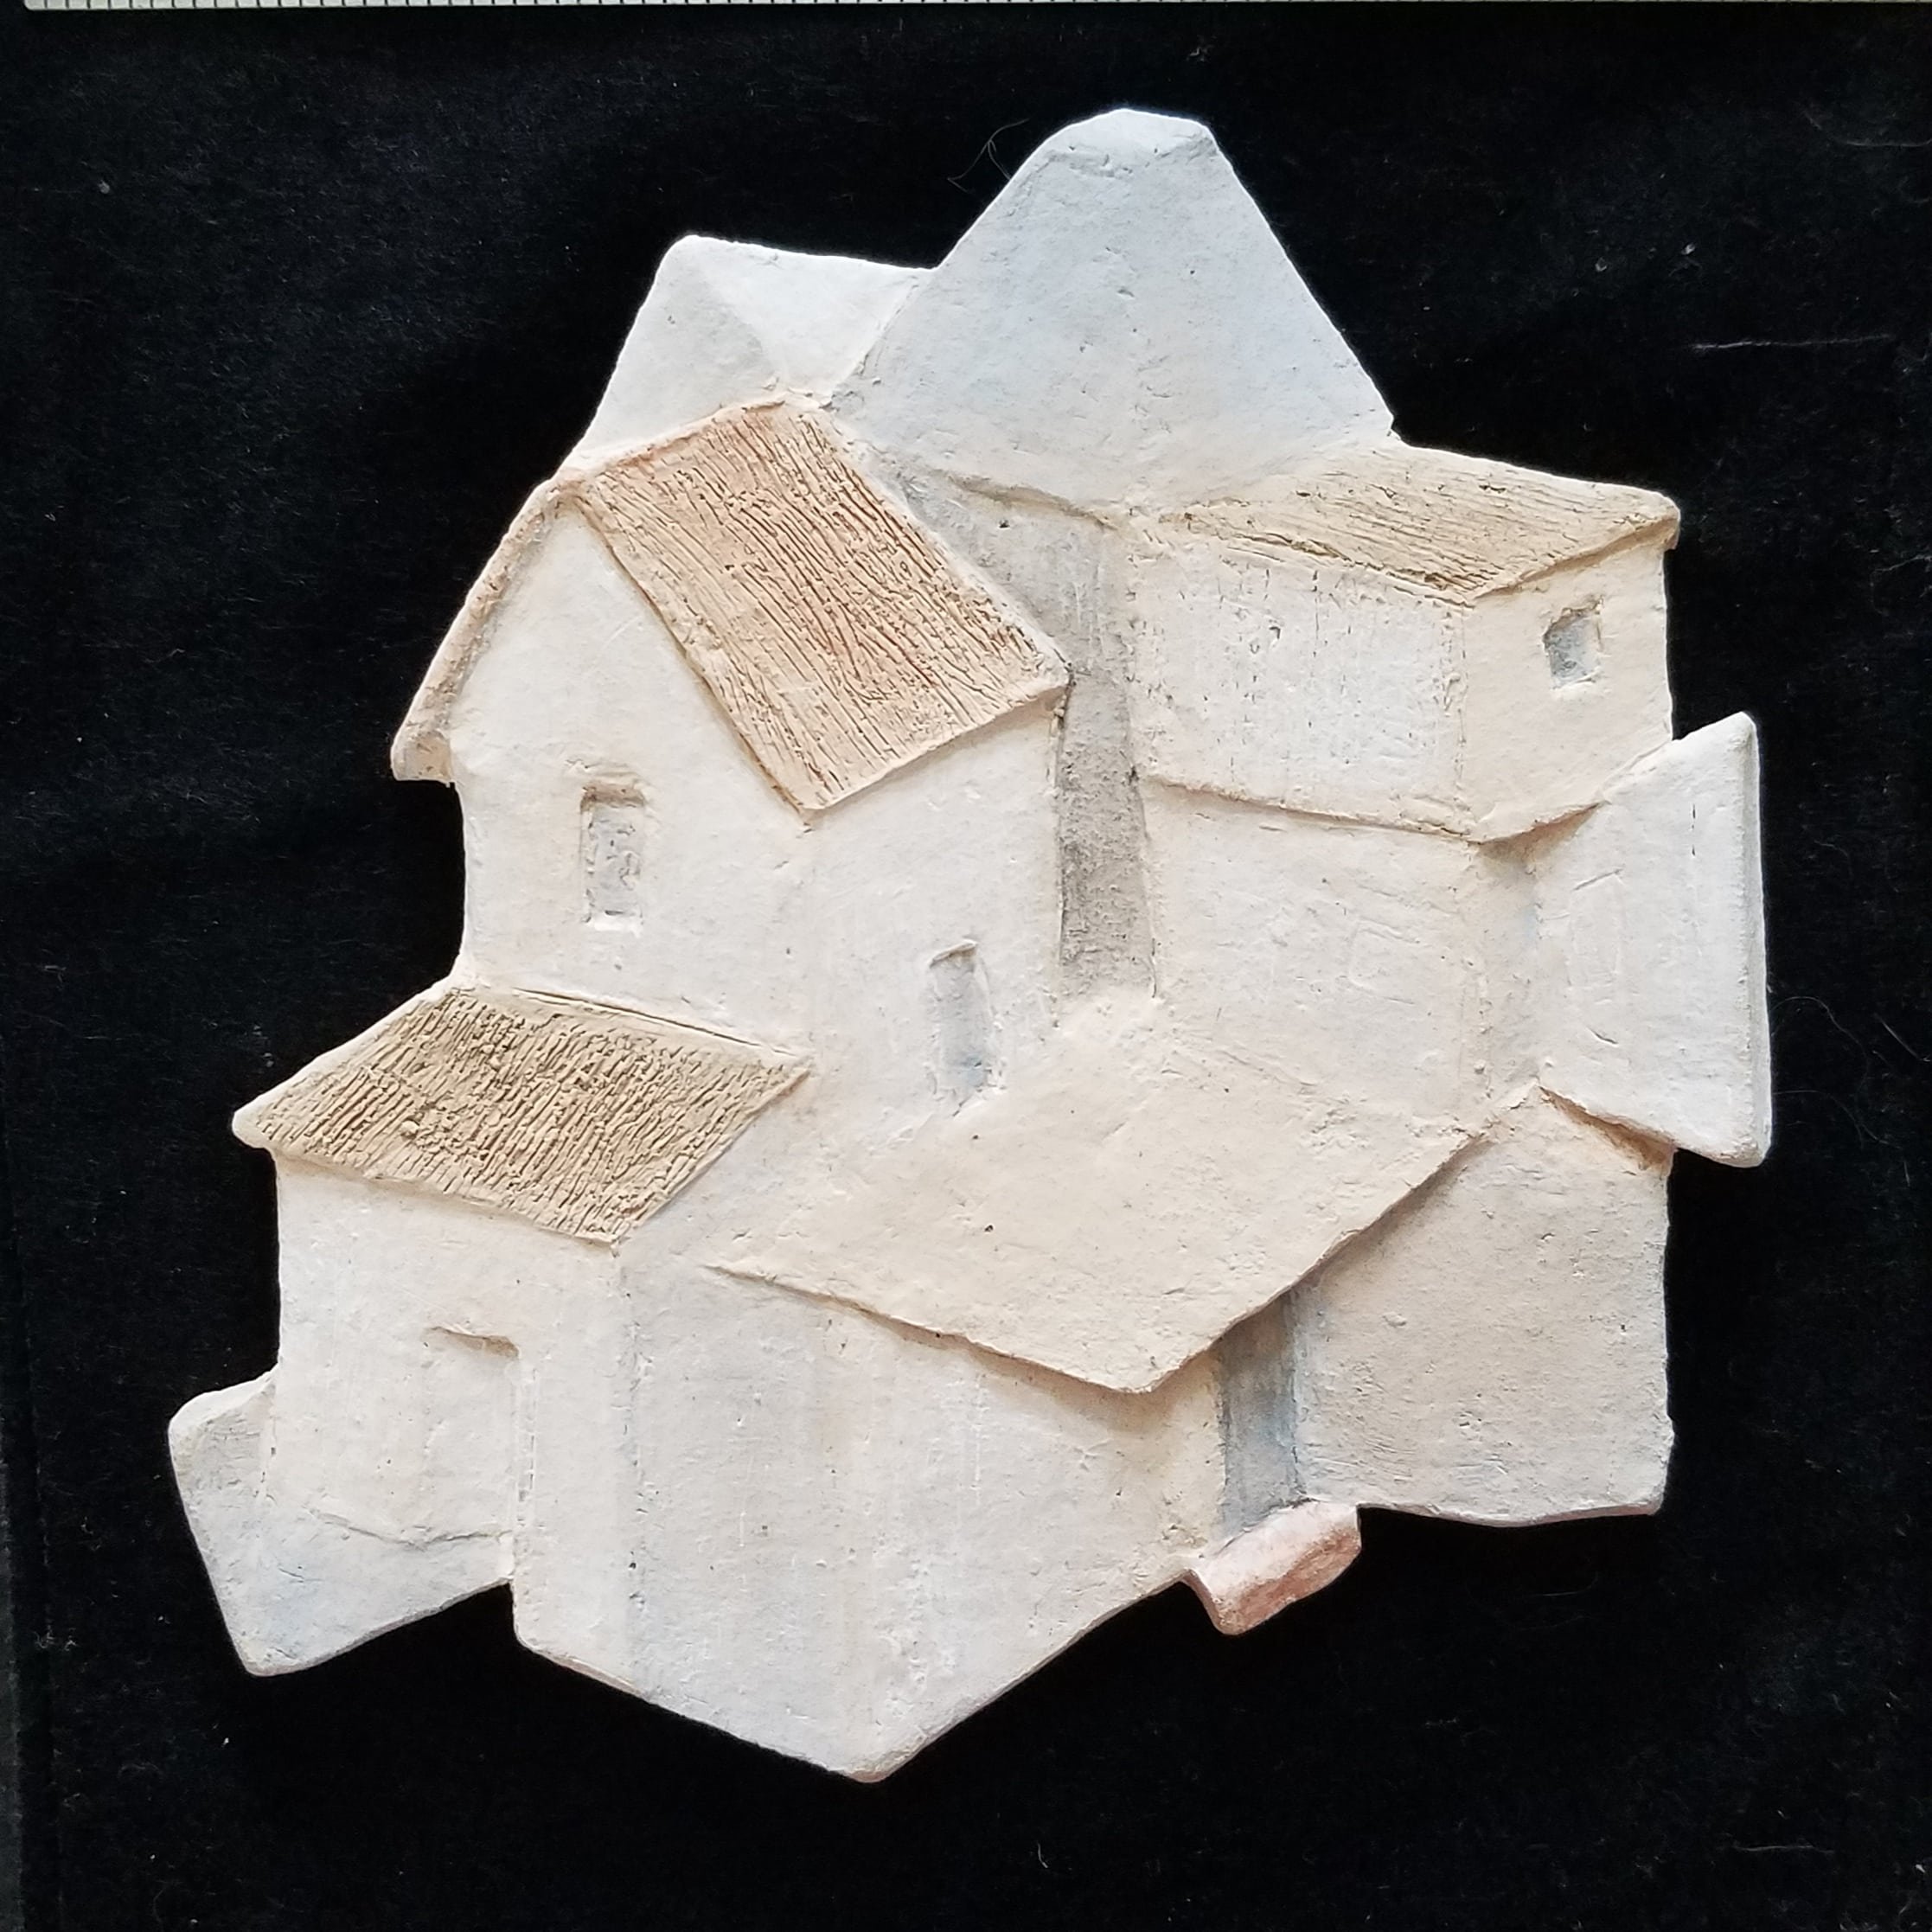 “A House of Many Rooms”, terra cotta relief, 4.5”H x 5”W x .25”D, 2019